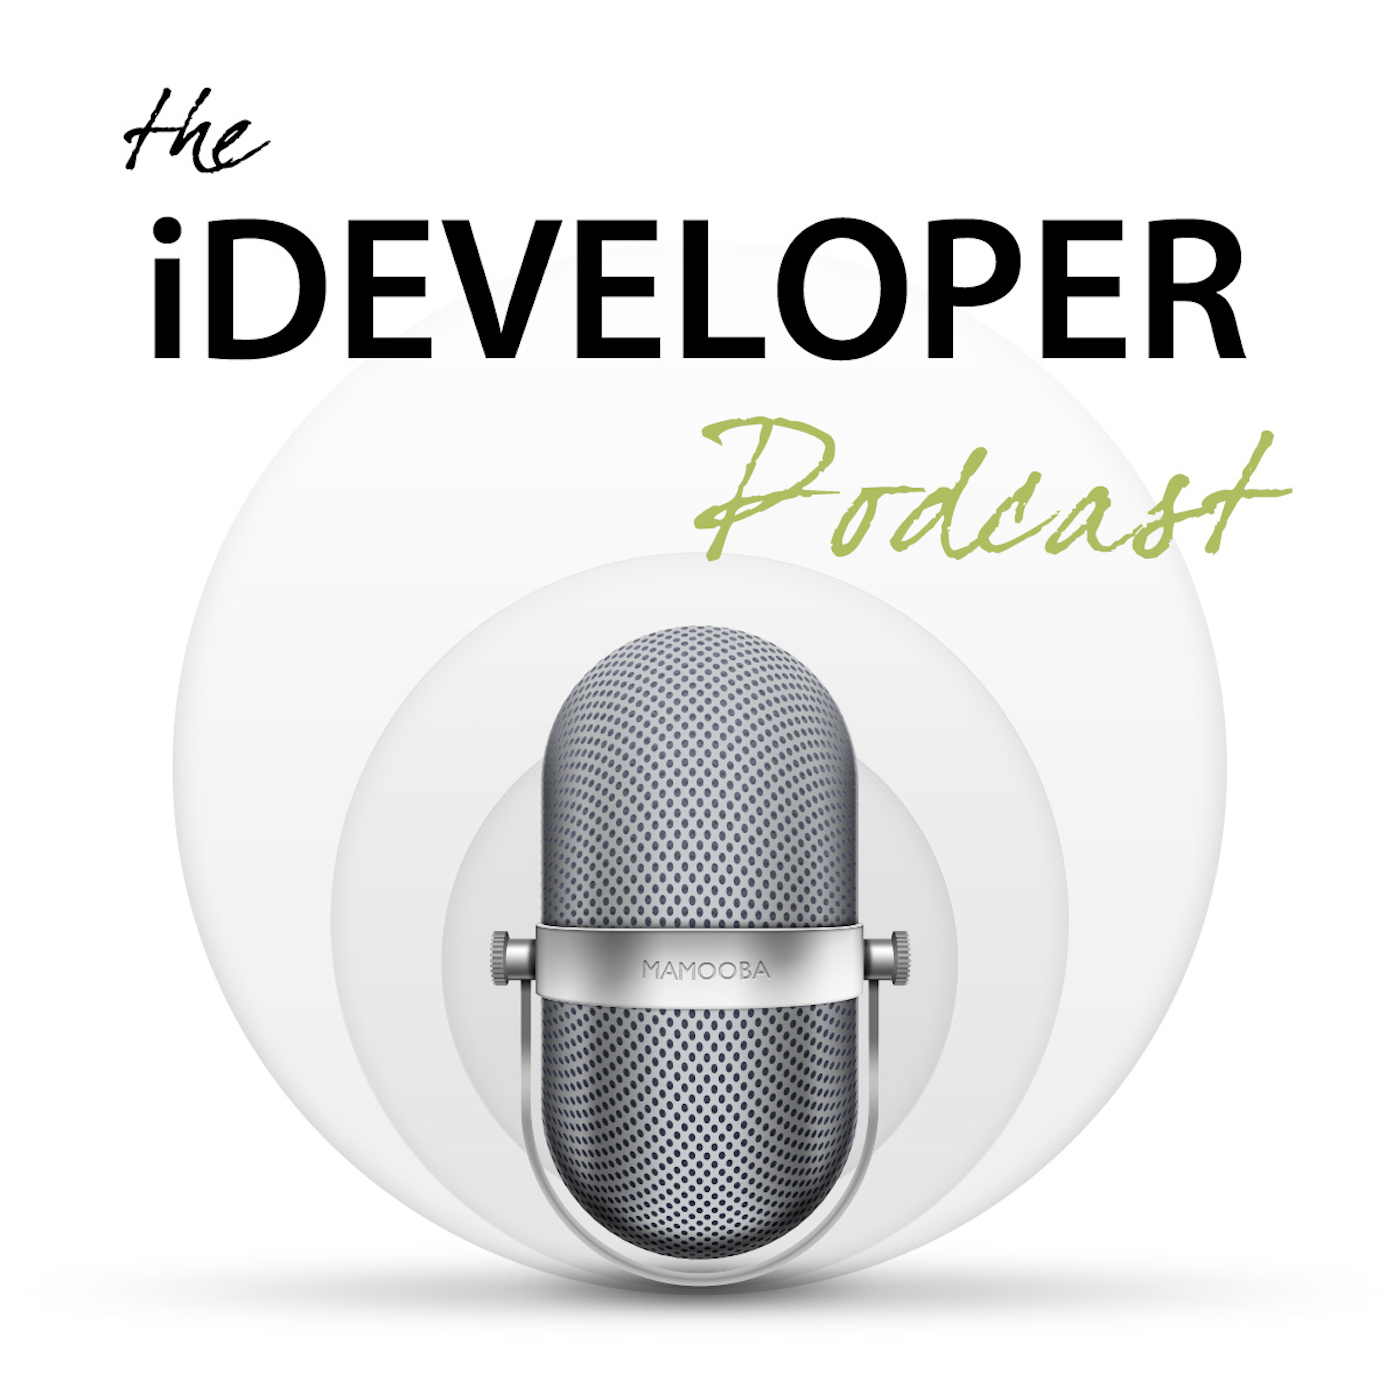 The iDeveloper Podcast 076: The Christmas Special